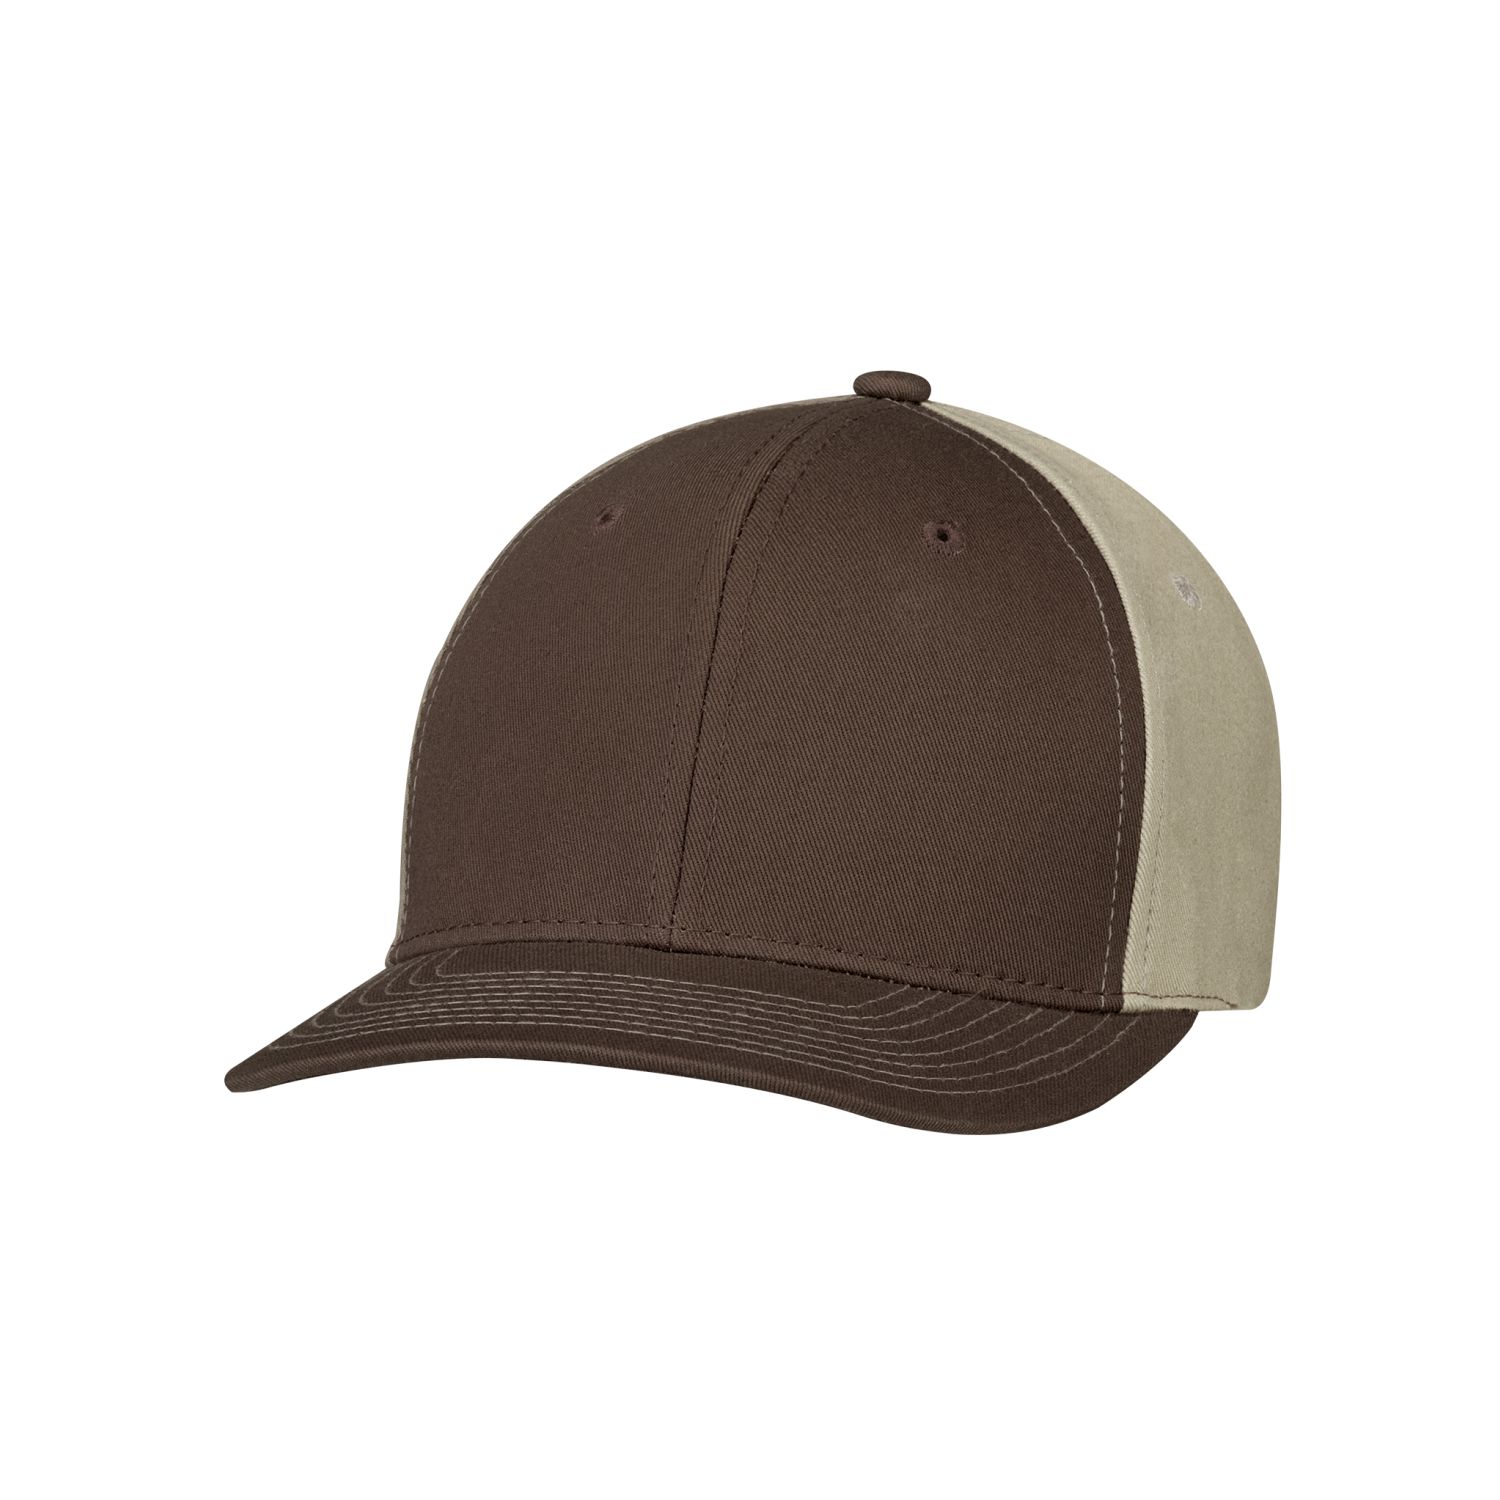 AJM 6-Panel Constructed Pro-Round Hat #8F010M Brown / Tan